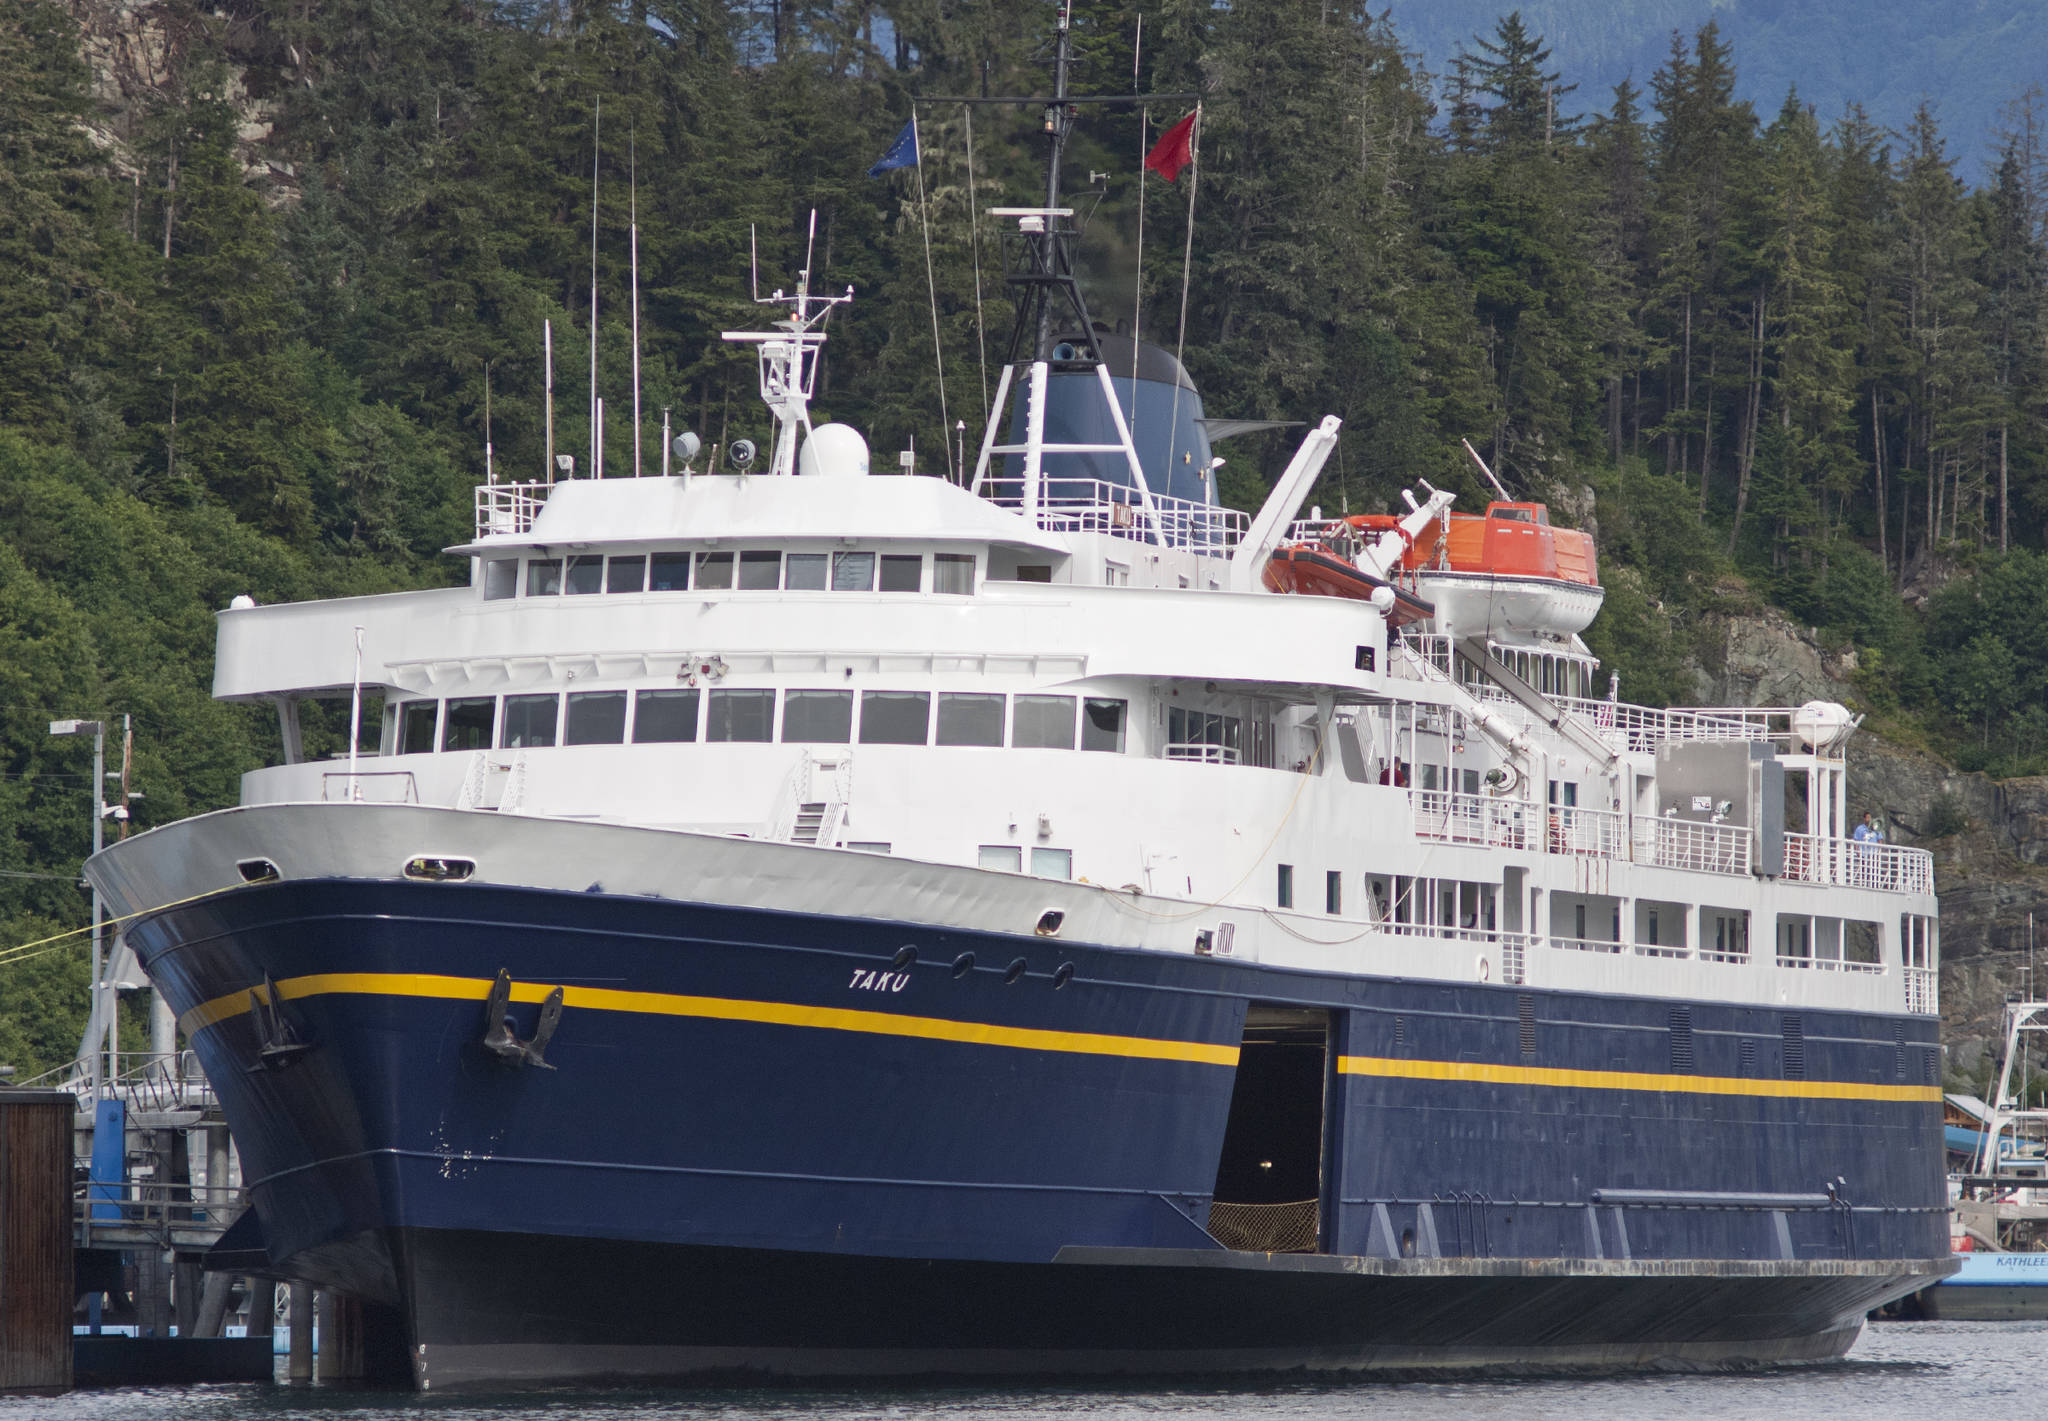 The State of Alaska is considering selling the Alaska Marine Highway ferry Taku. The ship was commissioned in 1963. (Michael Penn | Juneau Empire File)